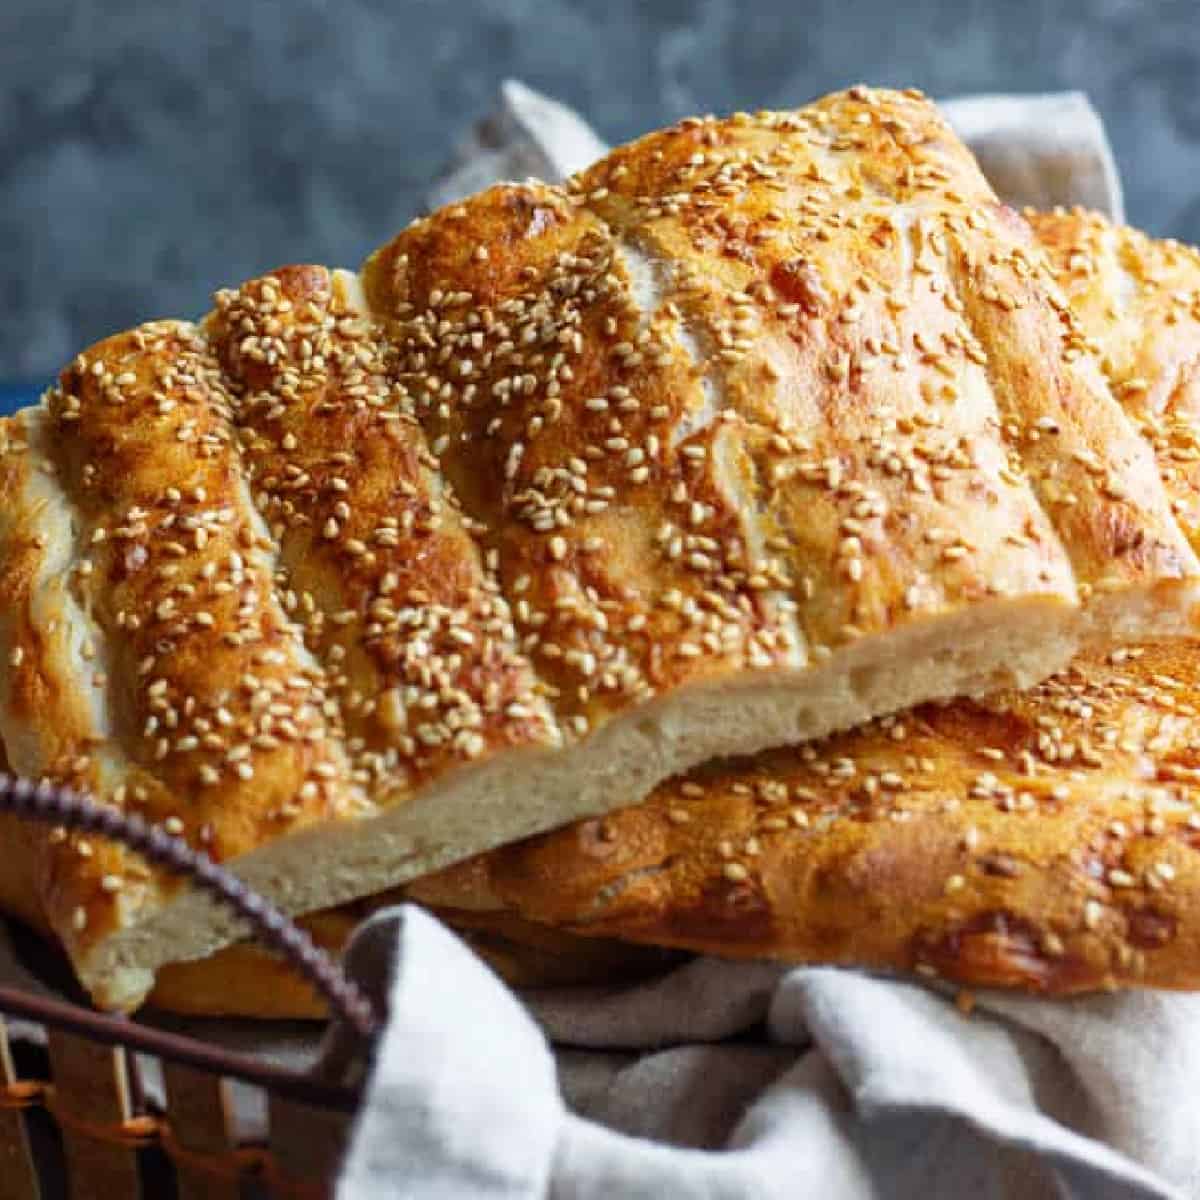 Sourdough barbari is so delicious. The texture and flavor is exactly the same as the ones in Iran. Topped with a simple glaze and sesame seeds, this bread is perfect for breakfast!
